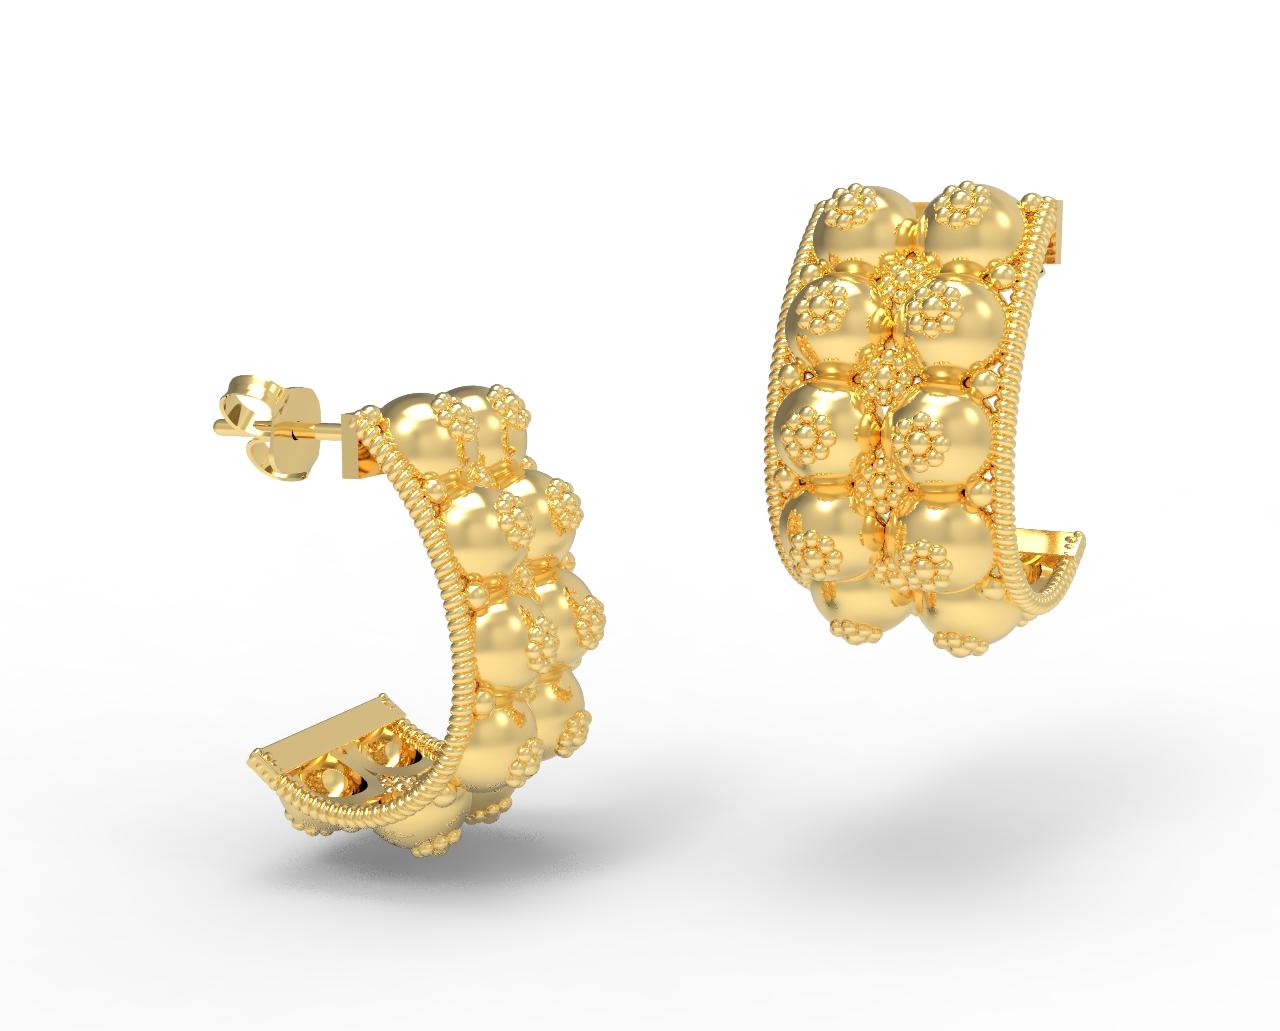 22 Karat Gold Baule Earrings by ROMAE Jewelry - Inspired by an Ancient Etruscan Design. The Italian word 